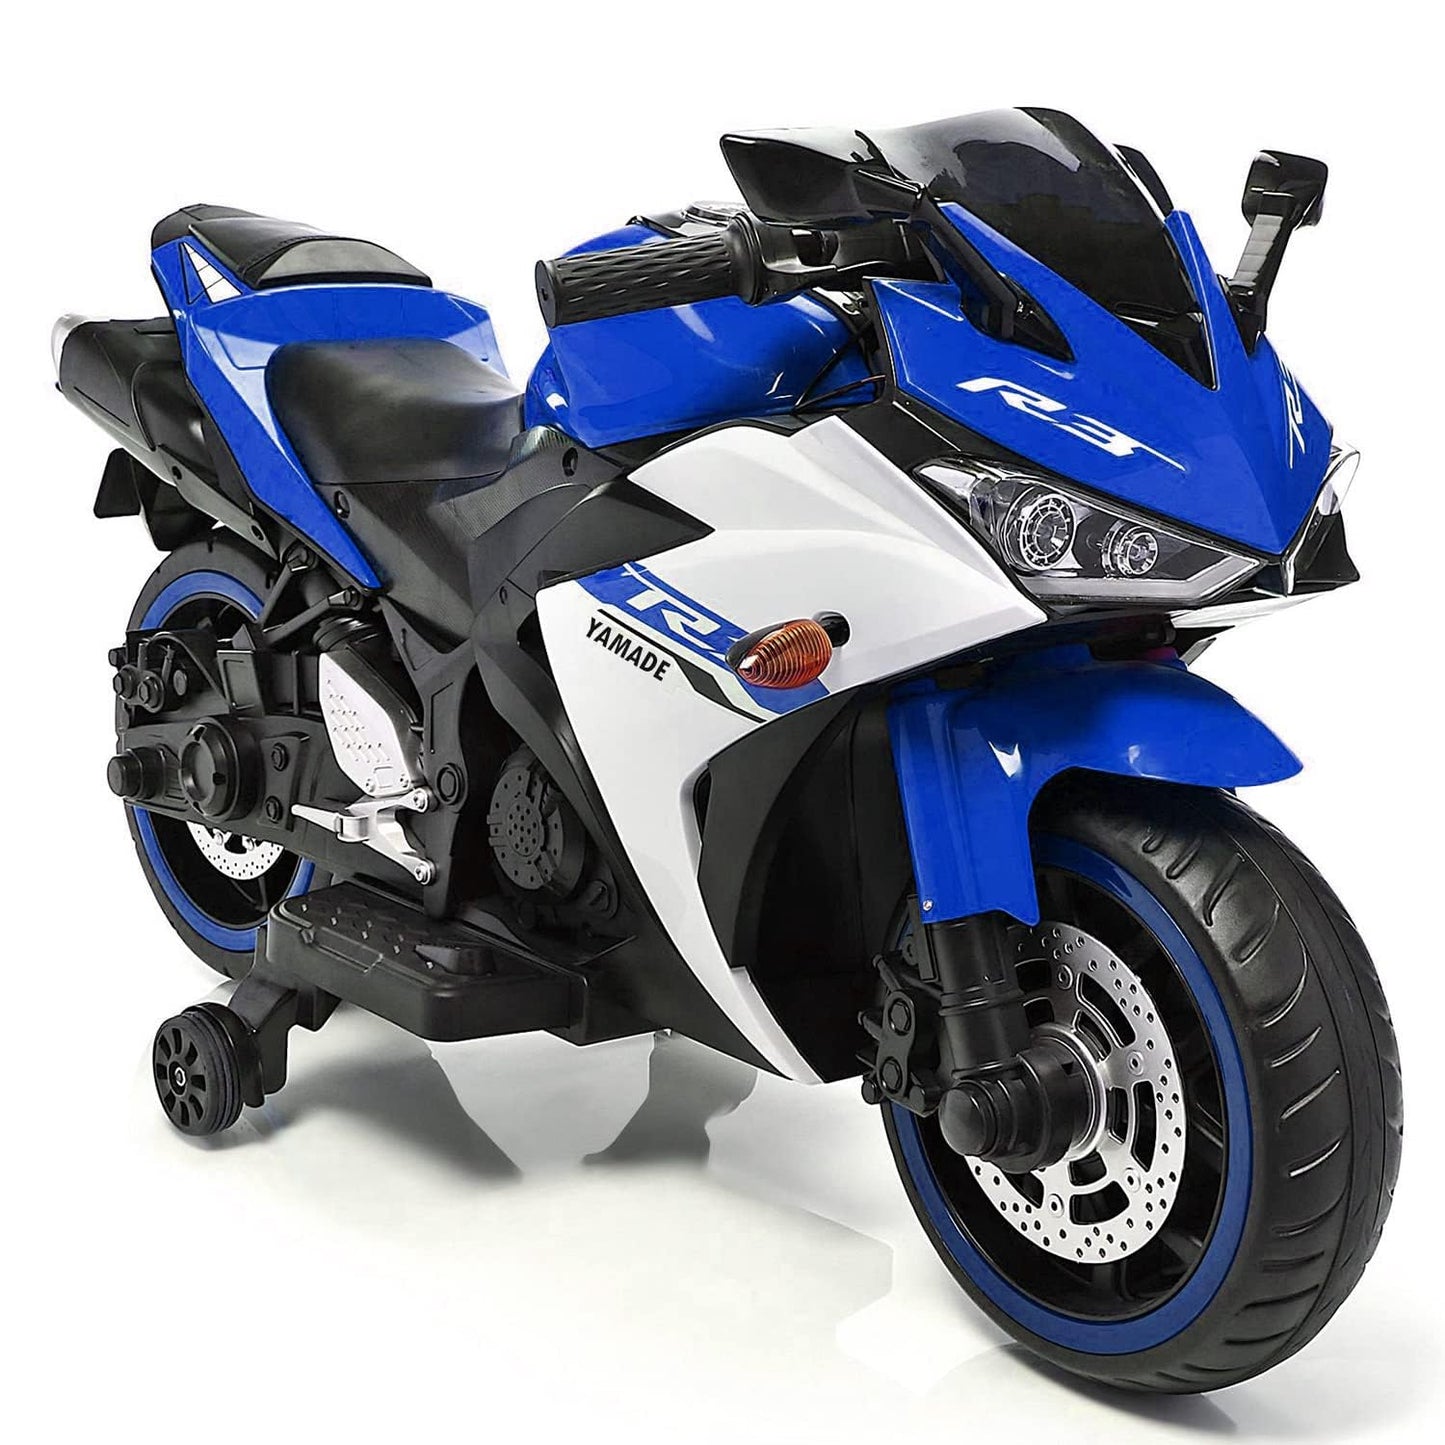 Letzride R3 Mountain Battery Operated Ride On Motor Bike for Kids, 2 to 7 Years, Blue & White